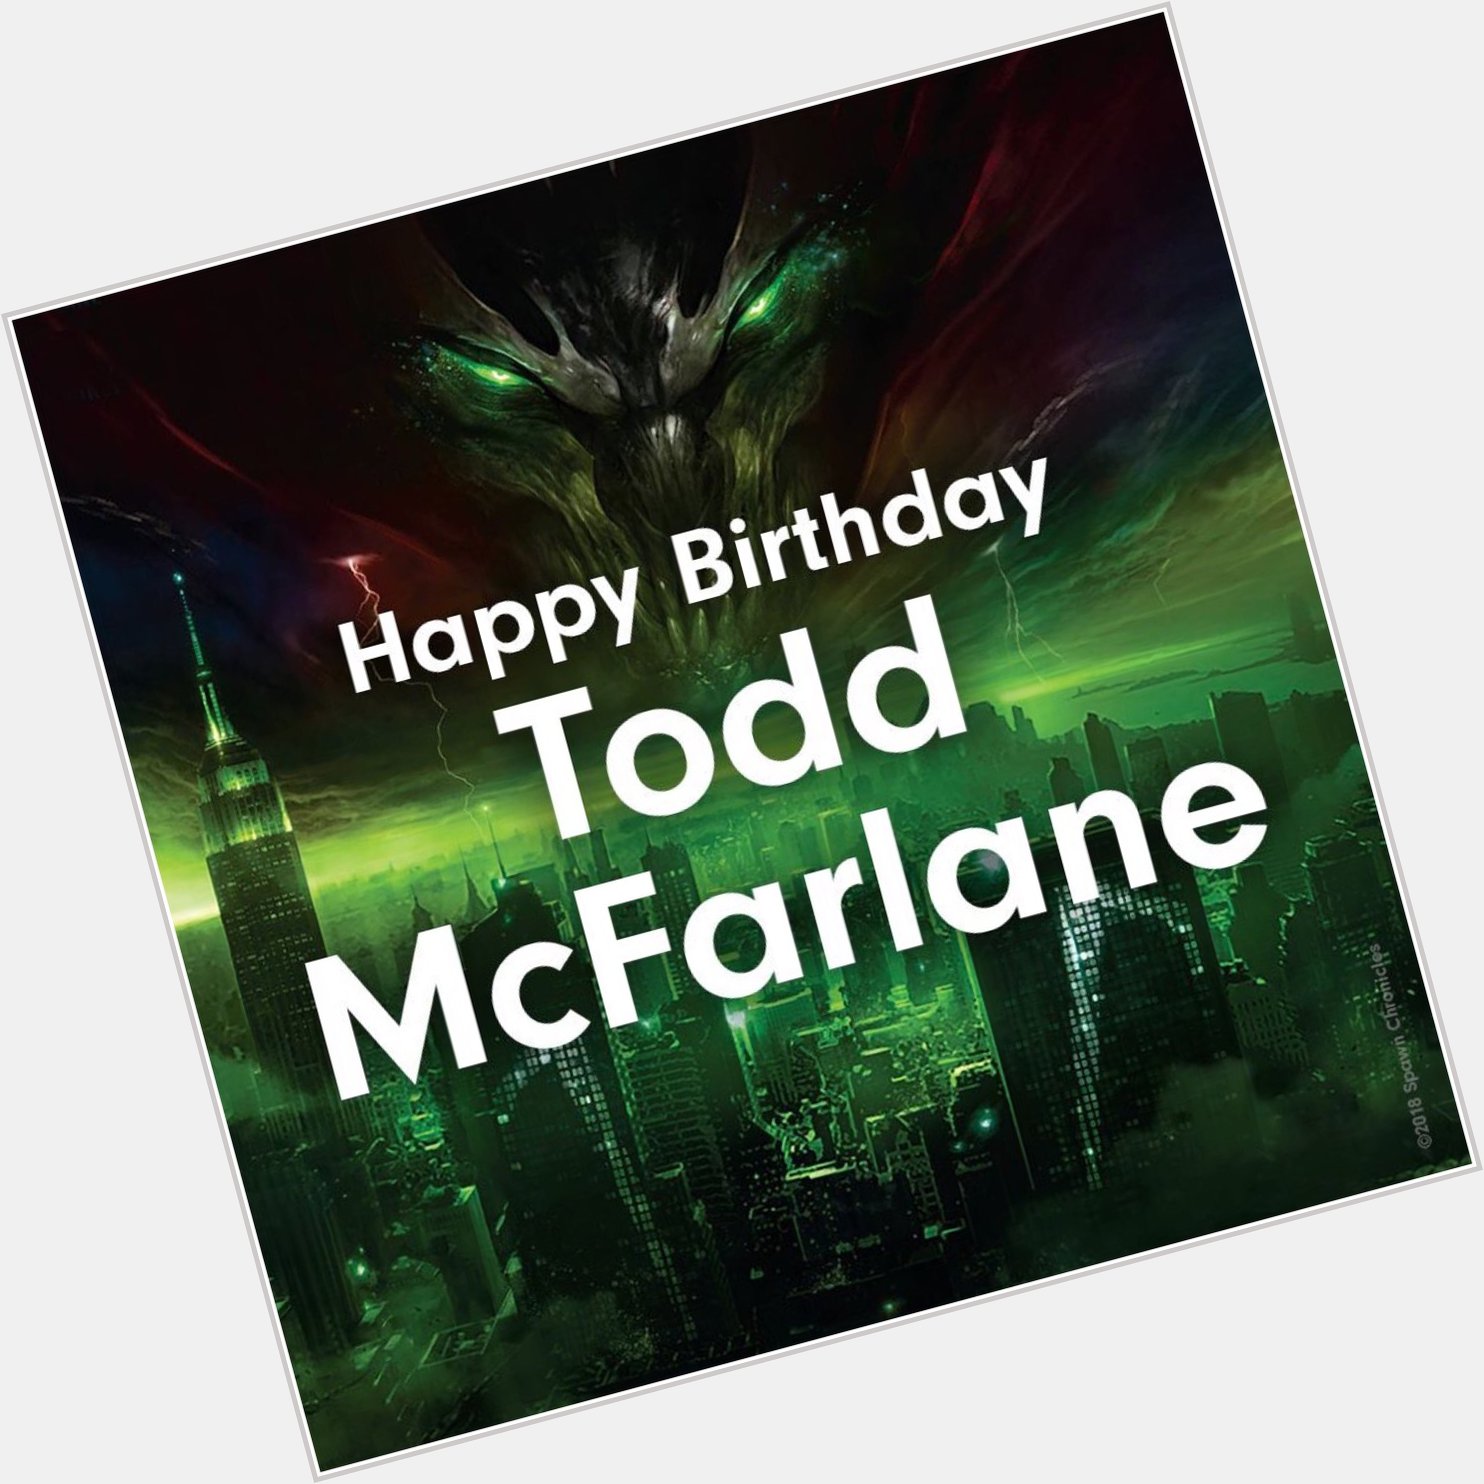 Happy Birthday to the Toddfather himself, Mr.     